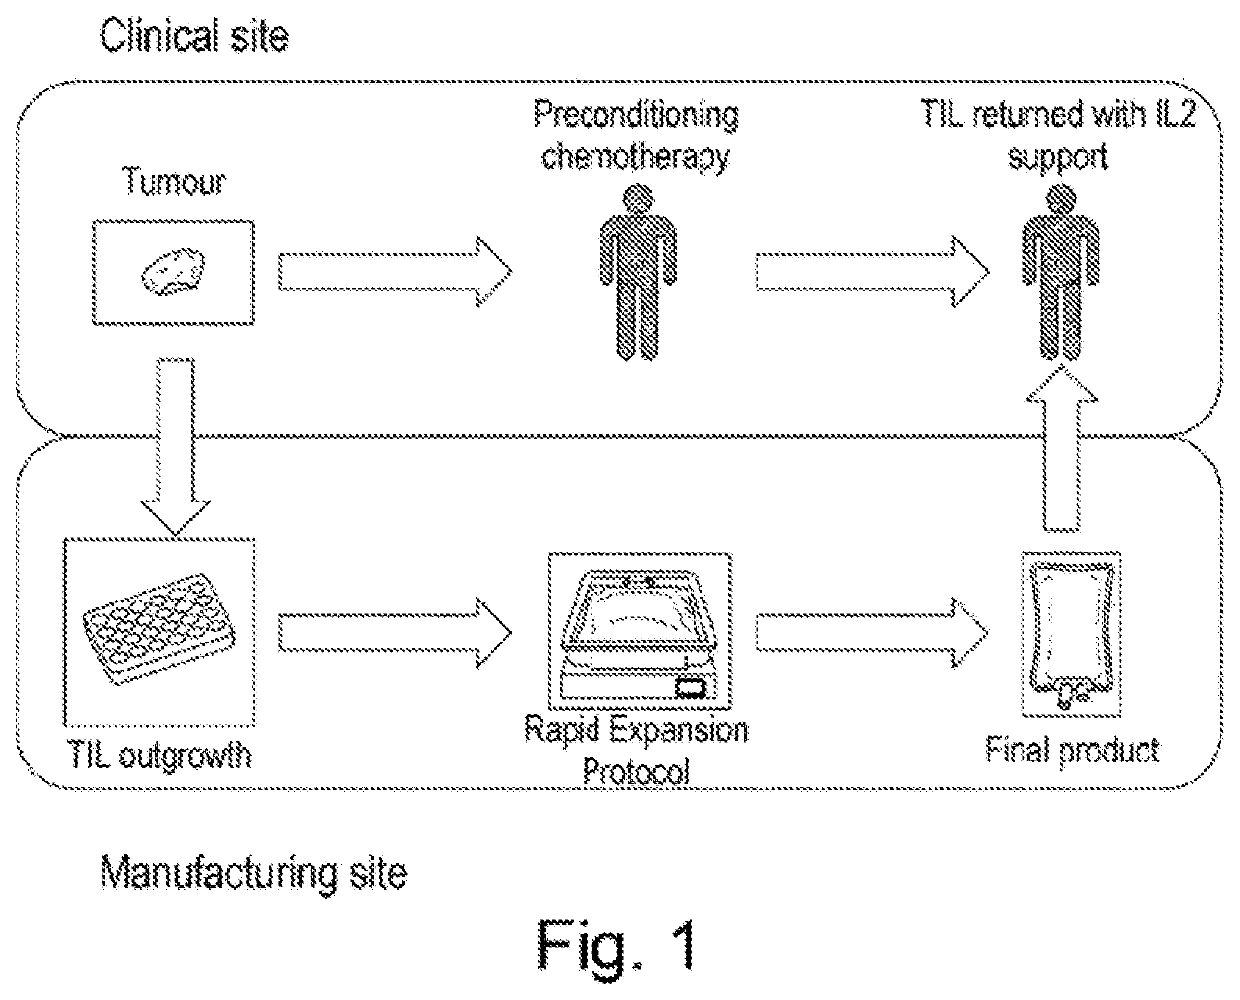 Biomarker predictive of tumour infiltrating lymphocyte therapy and uses thereof